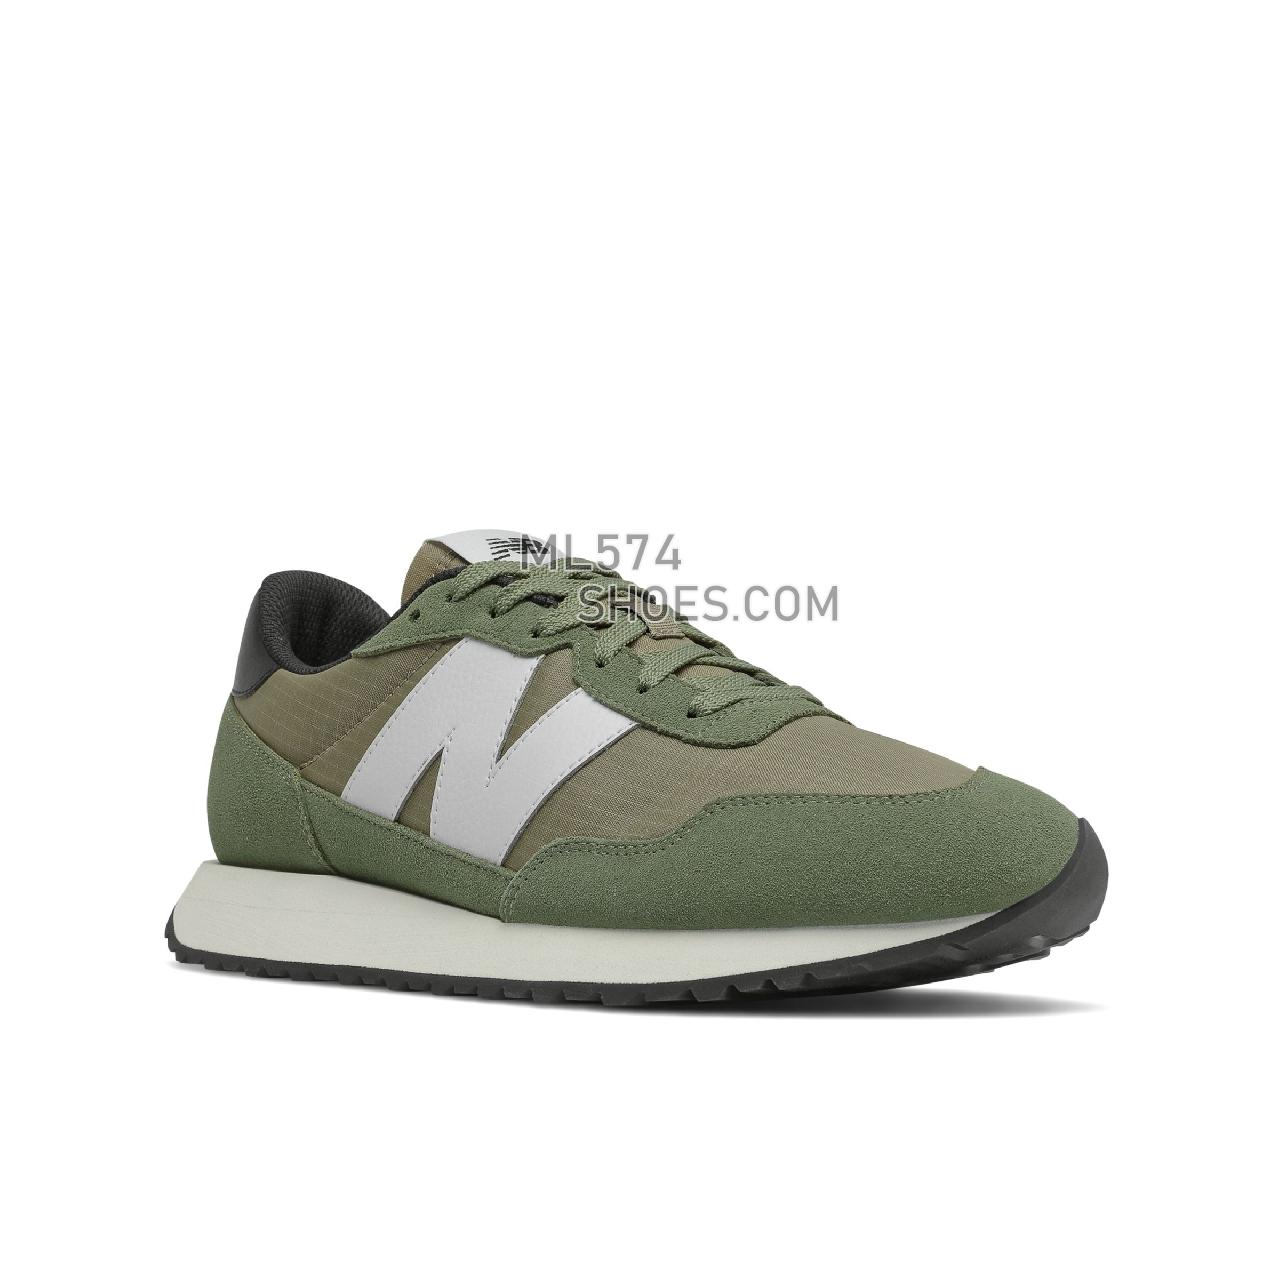 New Balance 237 - Men's Sport Style Sneakers - Norway Spruce with Covert Green - MS237UT1